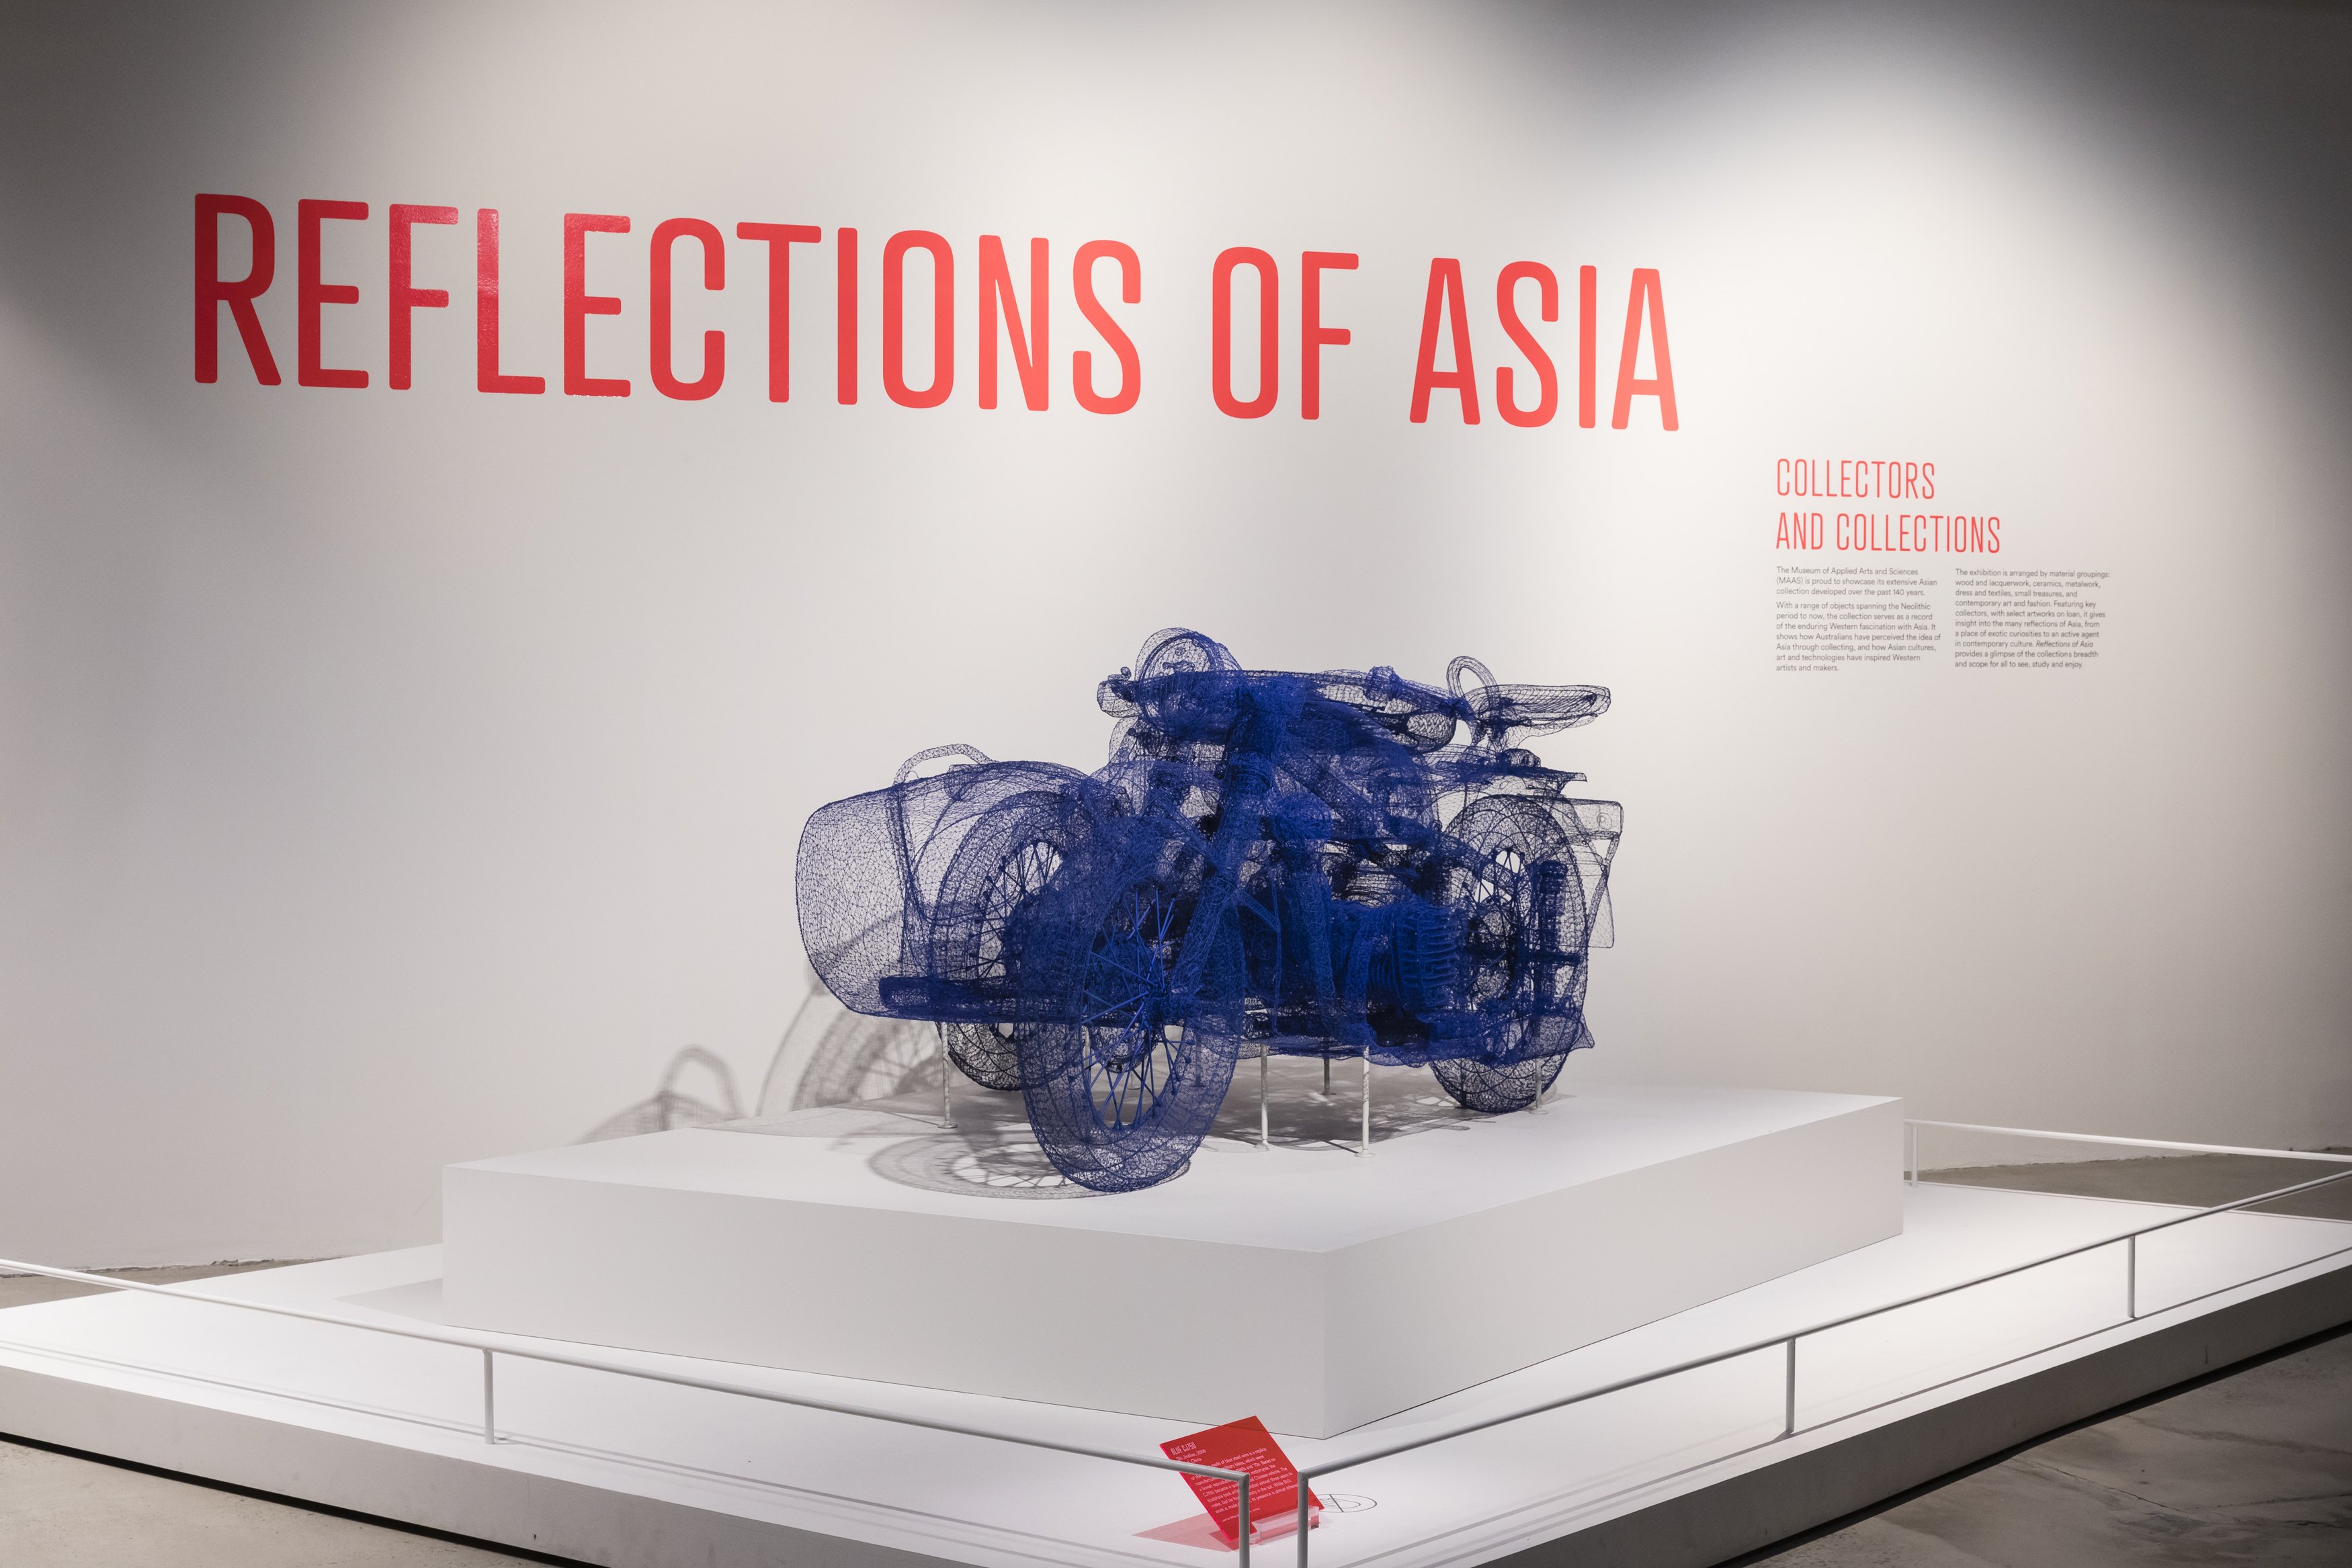 View of an exhibition title ‘Reflections of Asia: Collectors and Collection' on a white wall and an art work that is a motorcycle made of blue wire.